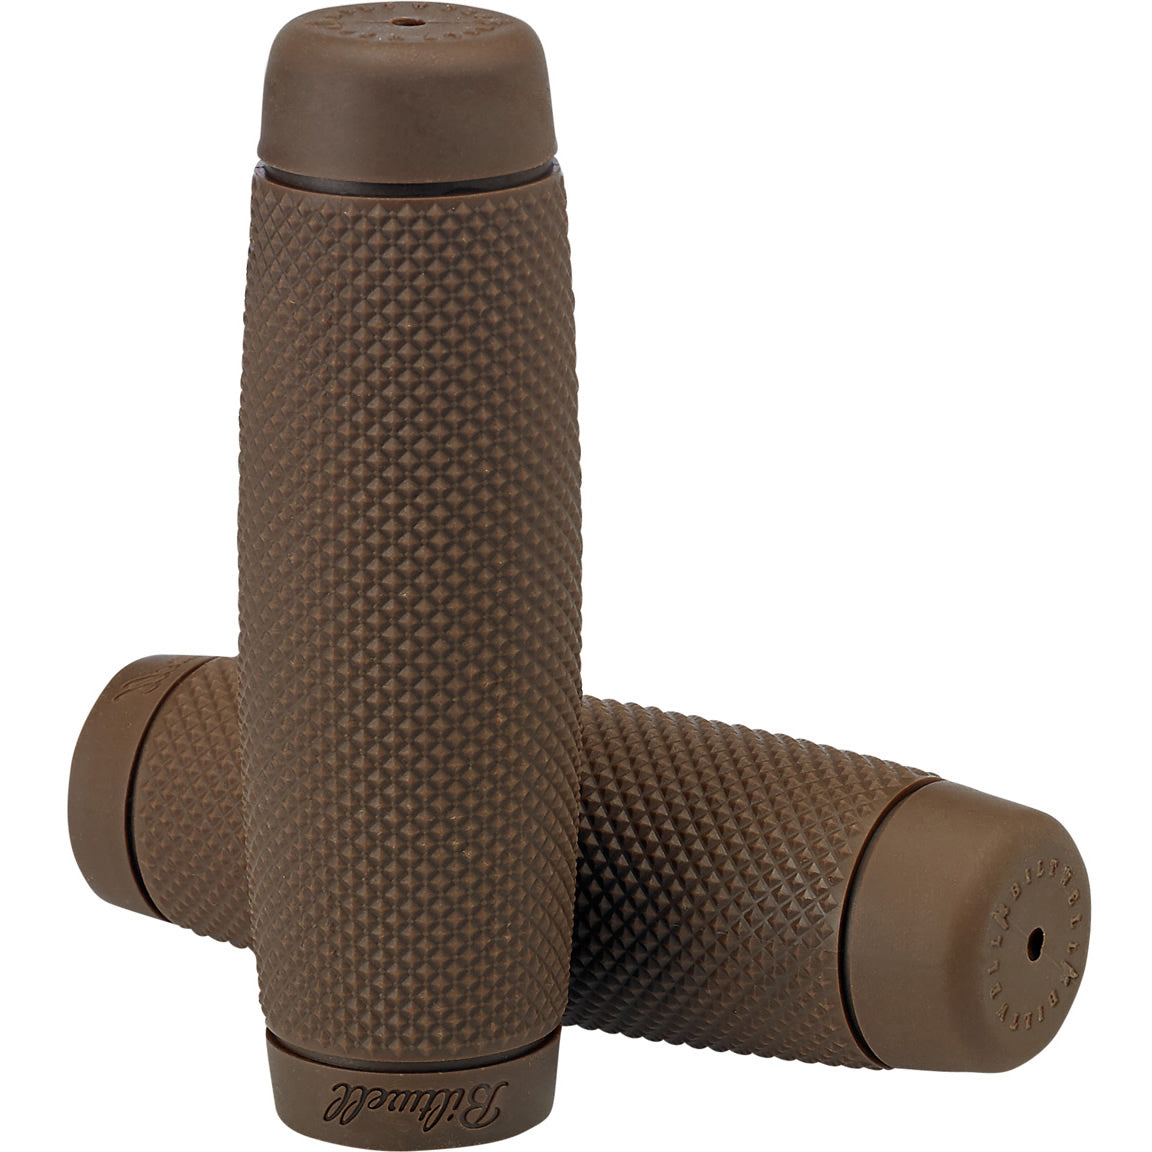 Recoil TPV Grips - Chocolate